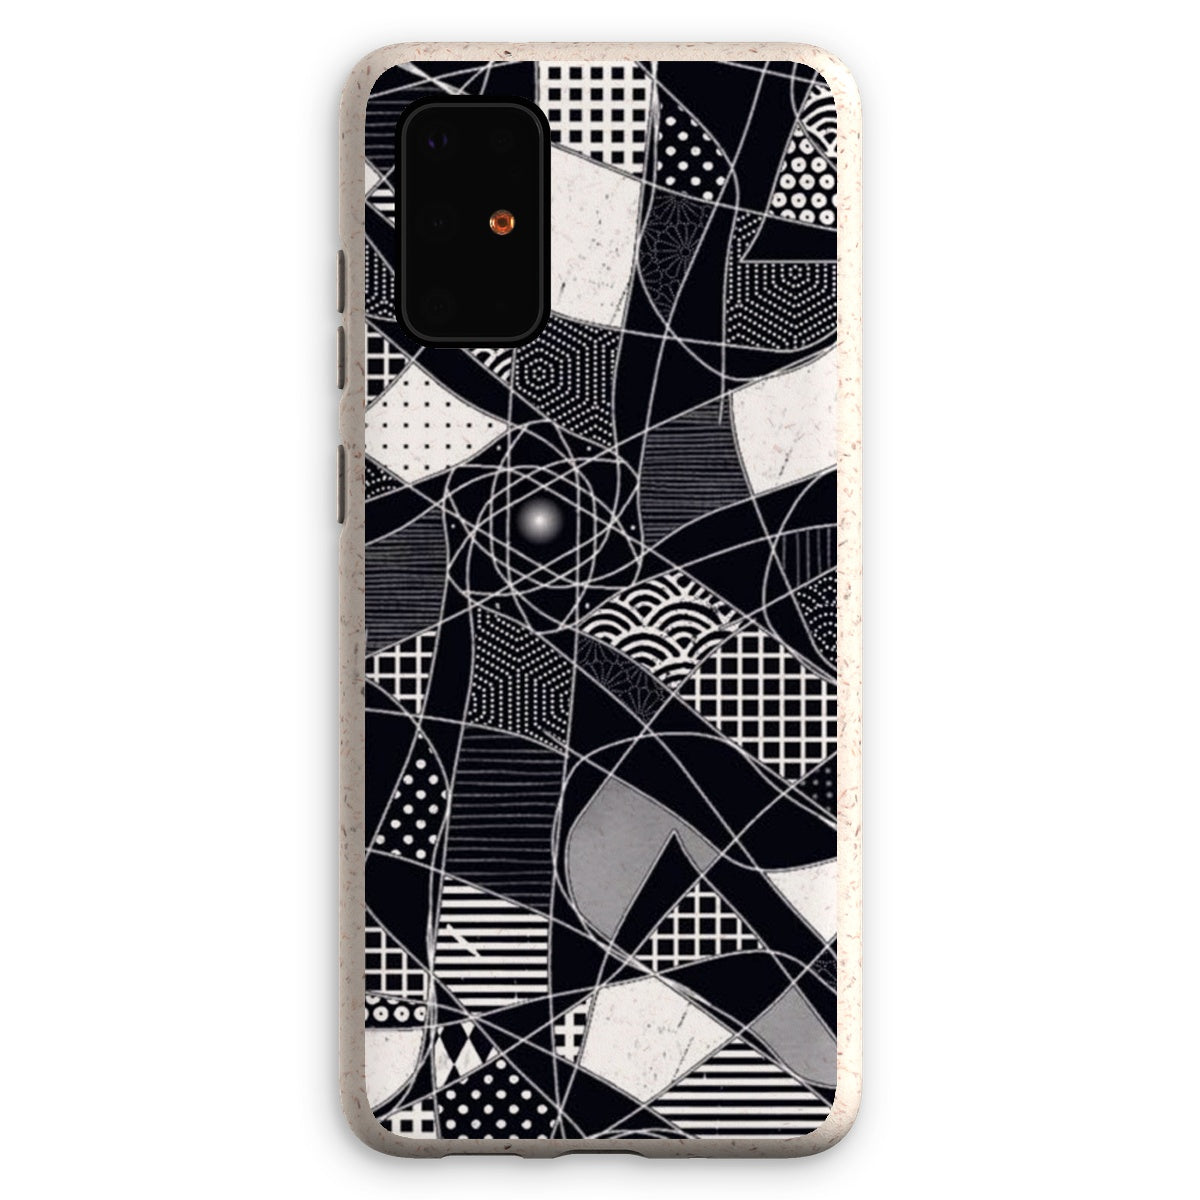 The Pattern Eco Phone Case